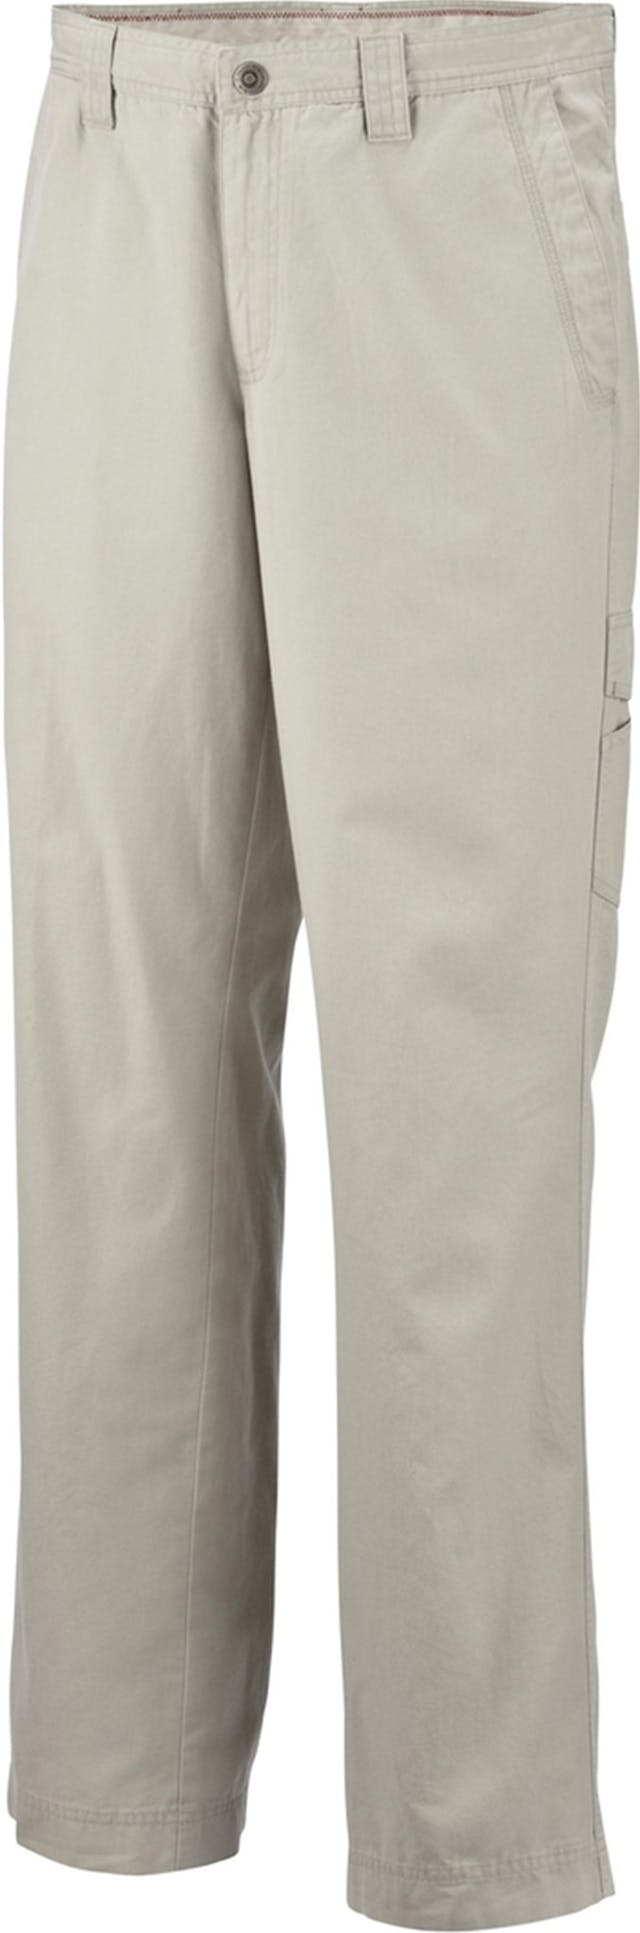 Product image for Ultimate ROC Tall Pant - Men's